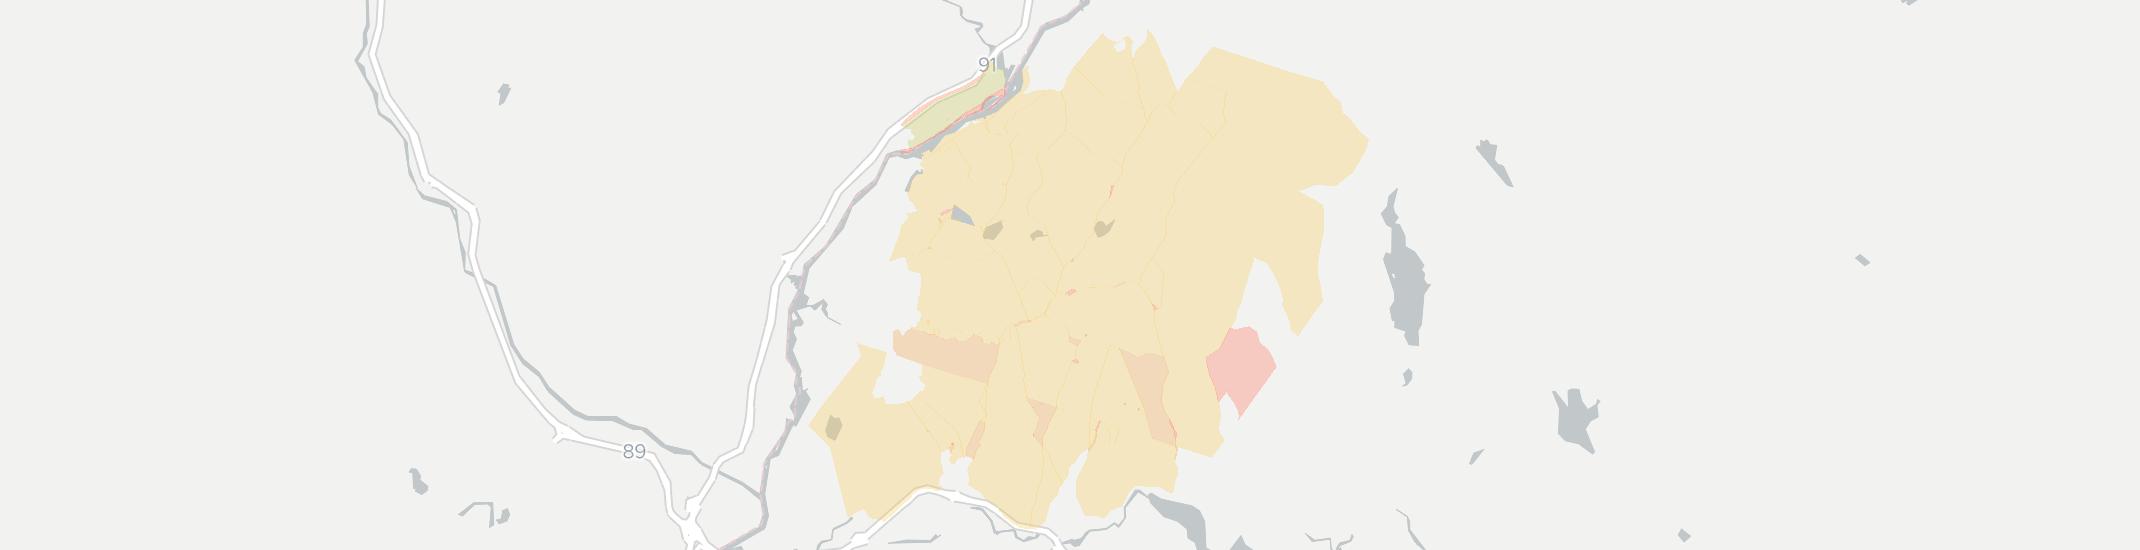 Etna Internet Competition Map. Click for interactive map.